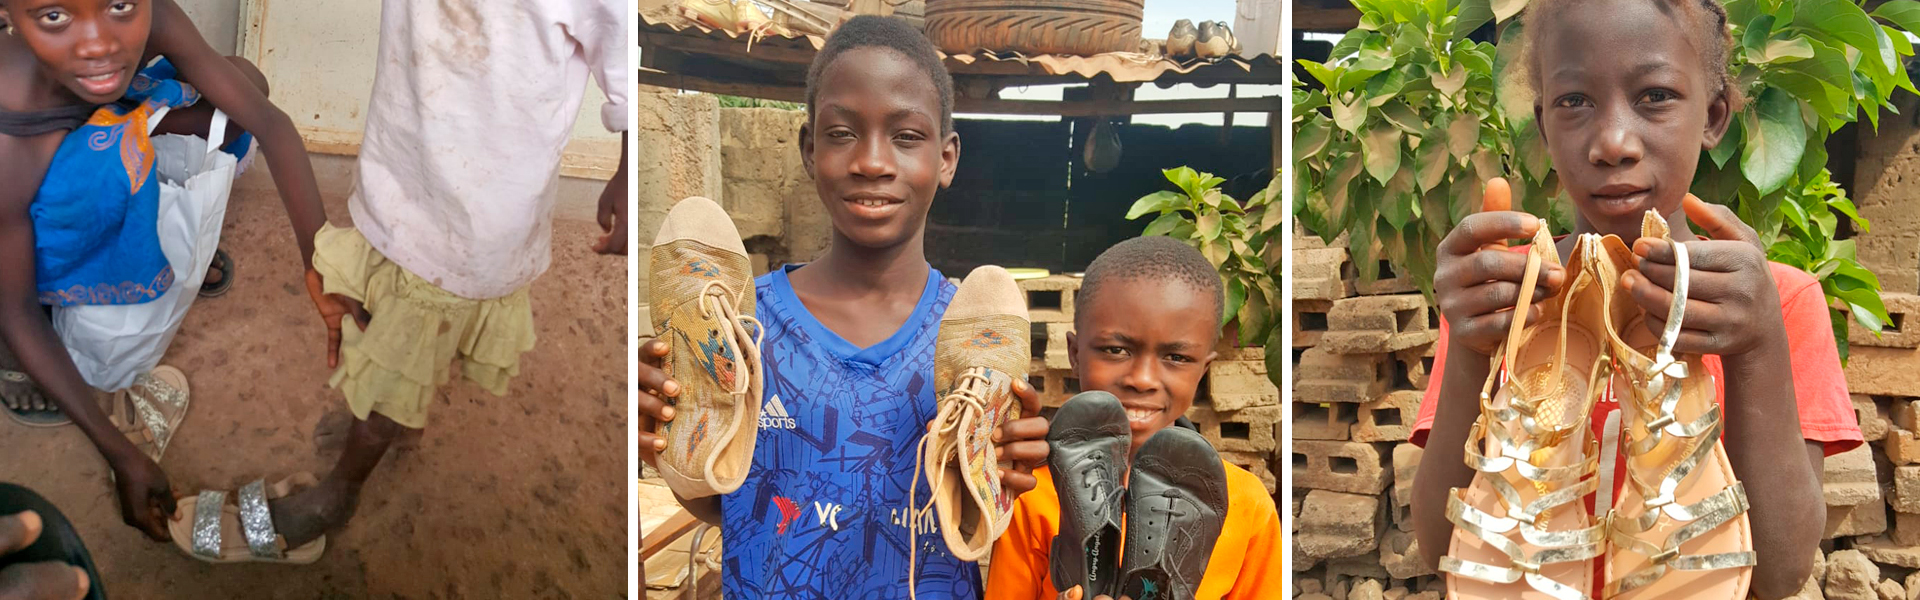 The Gambia Shoe Gallery 2